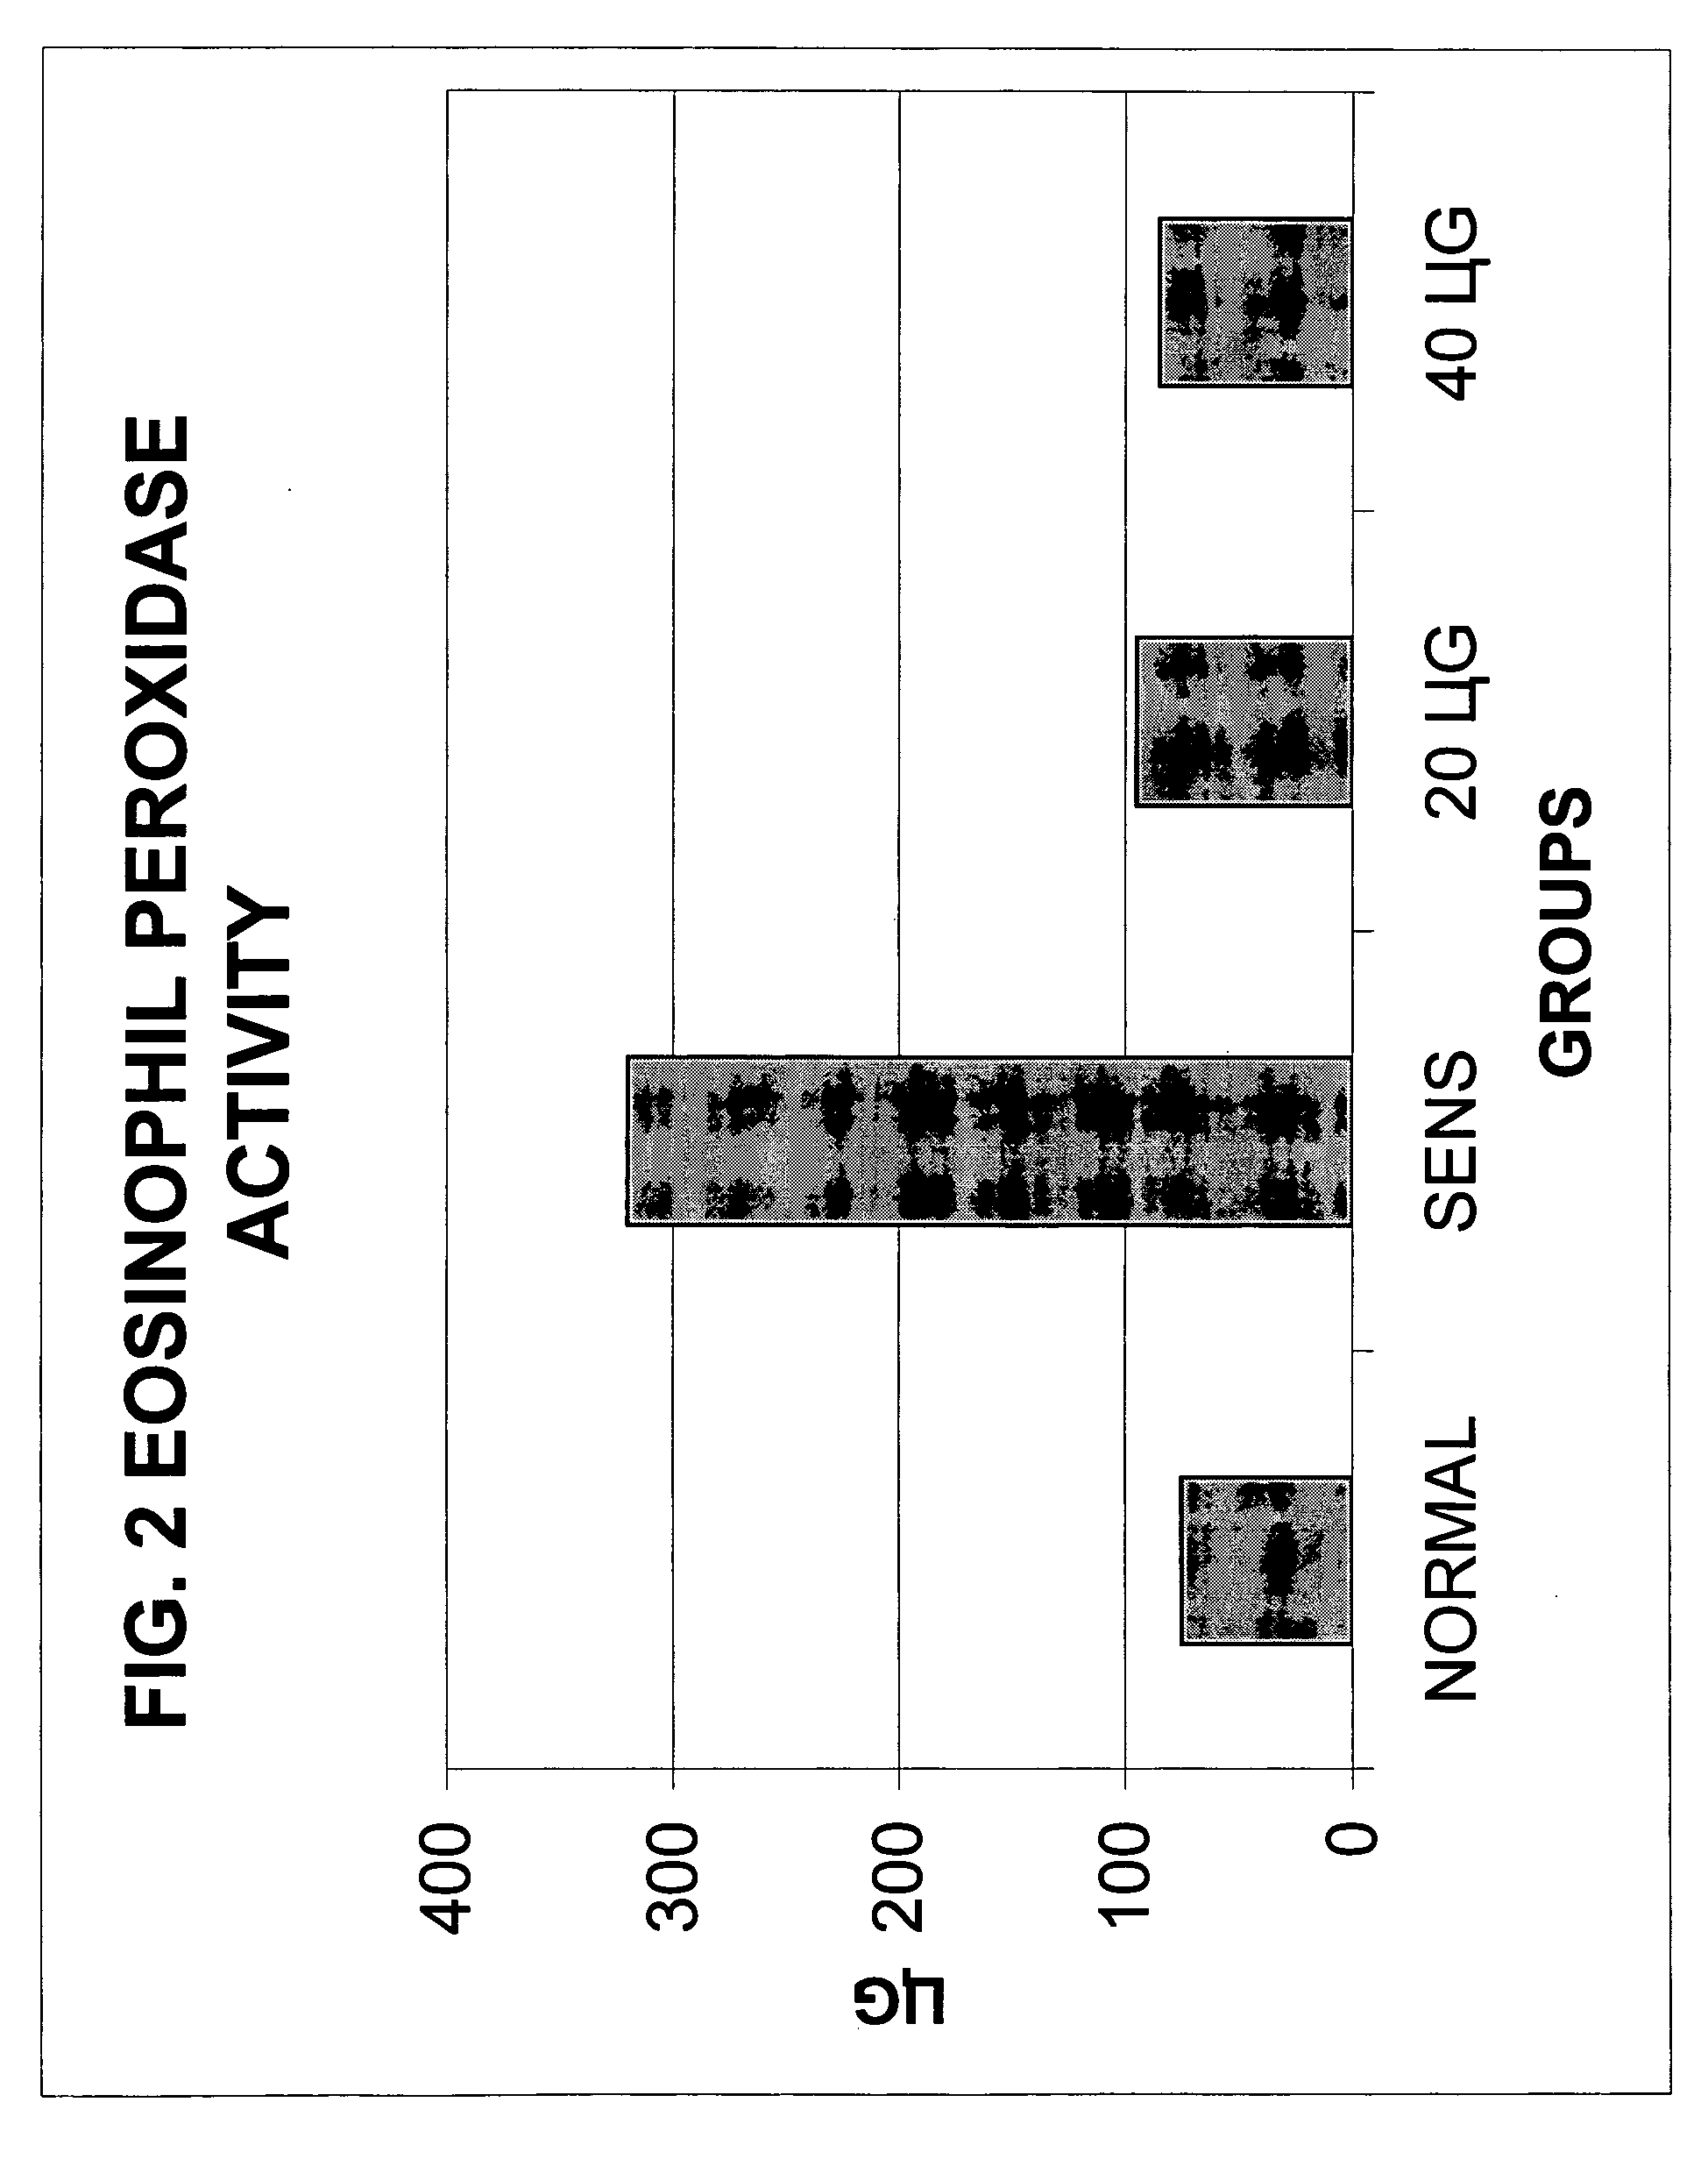 Sterically stabilized liposome and triamcinolone composition for treating the respiratory tract of a mammal